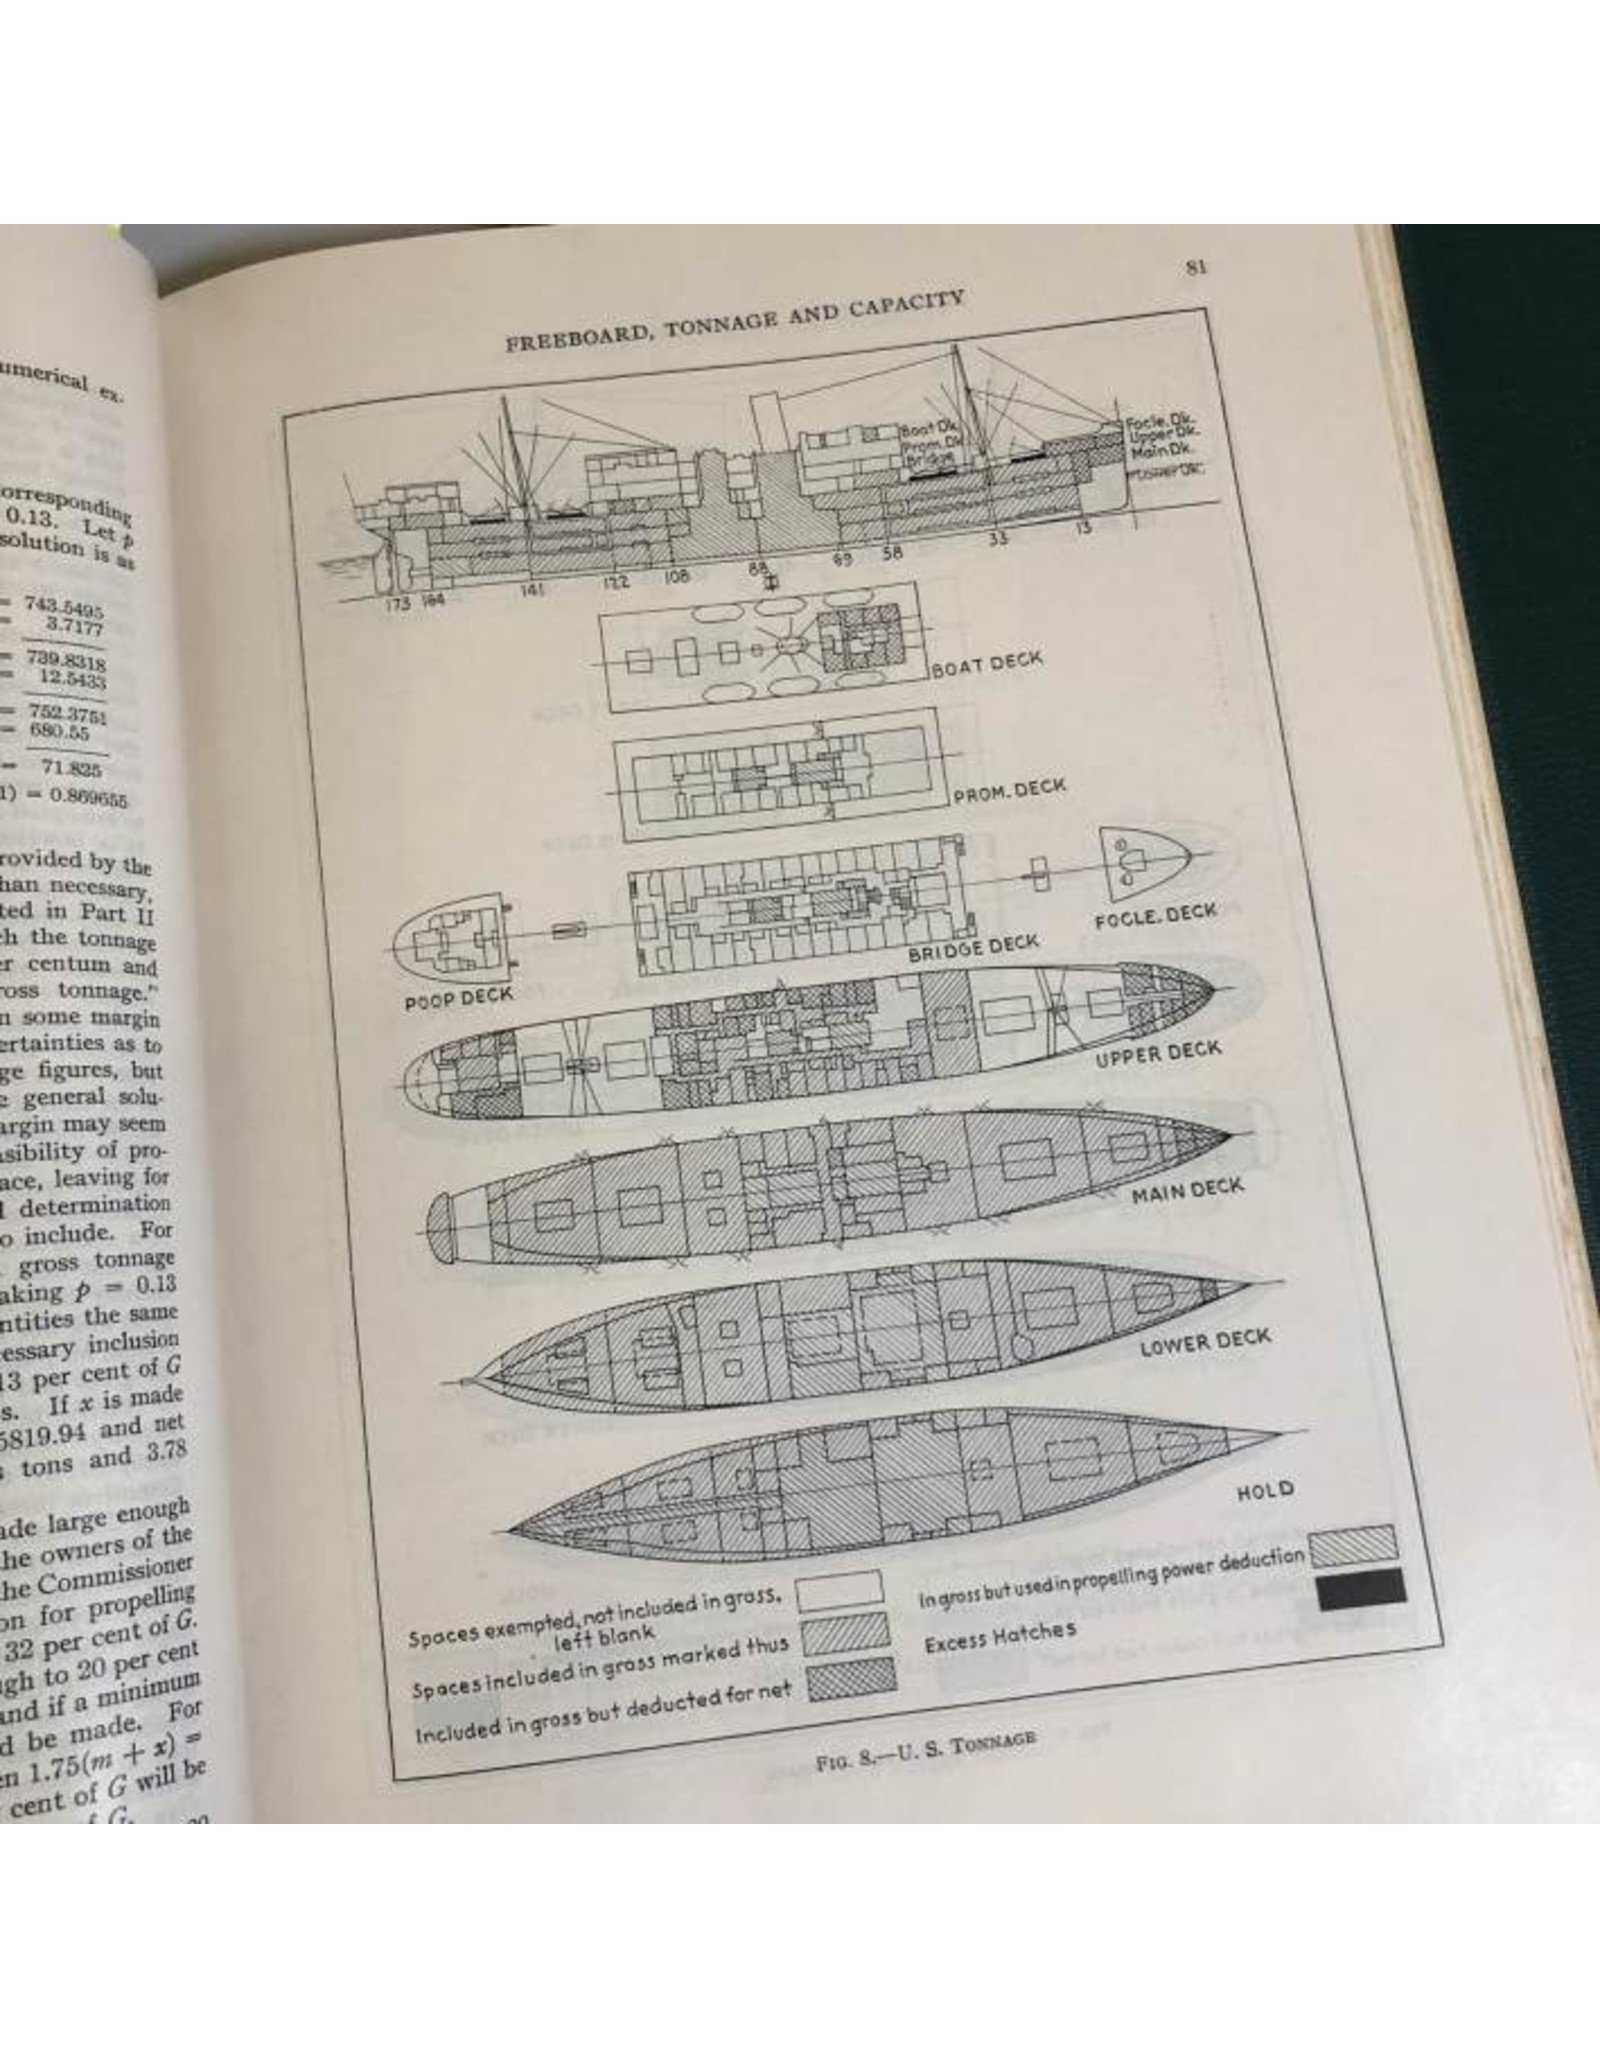 Hardcover book - Principles of Naval Architecture 2 vols